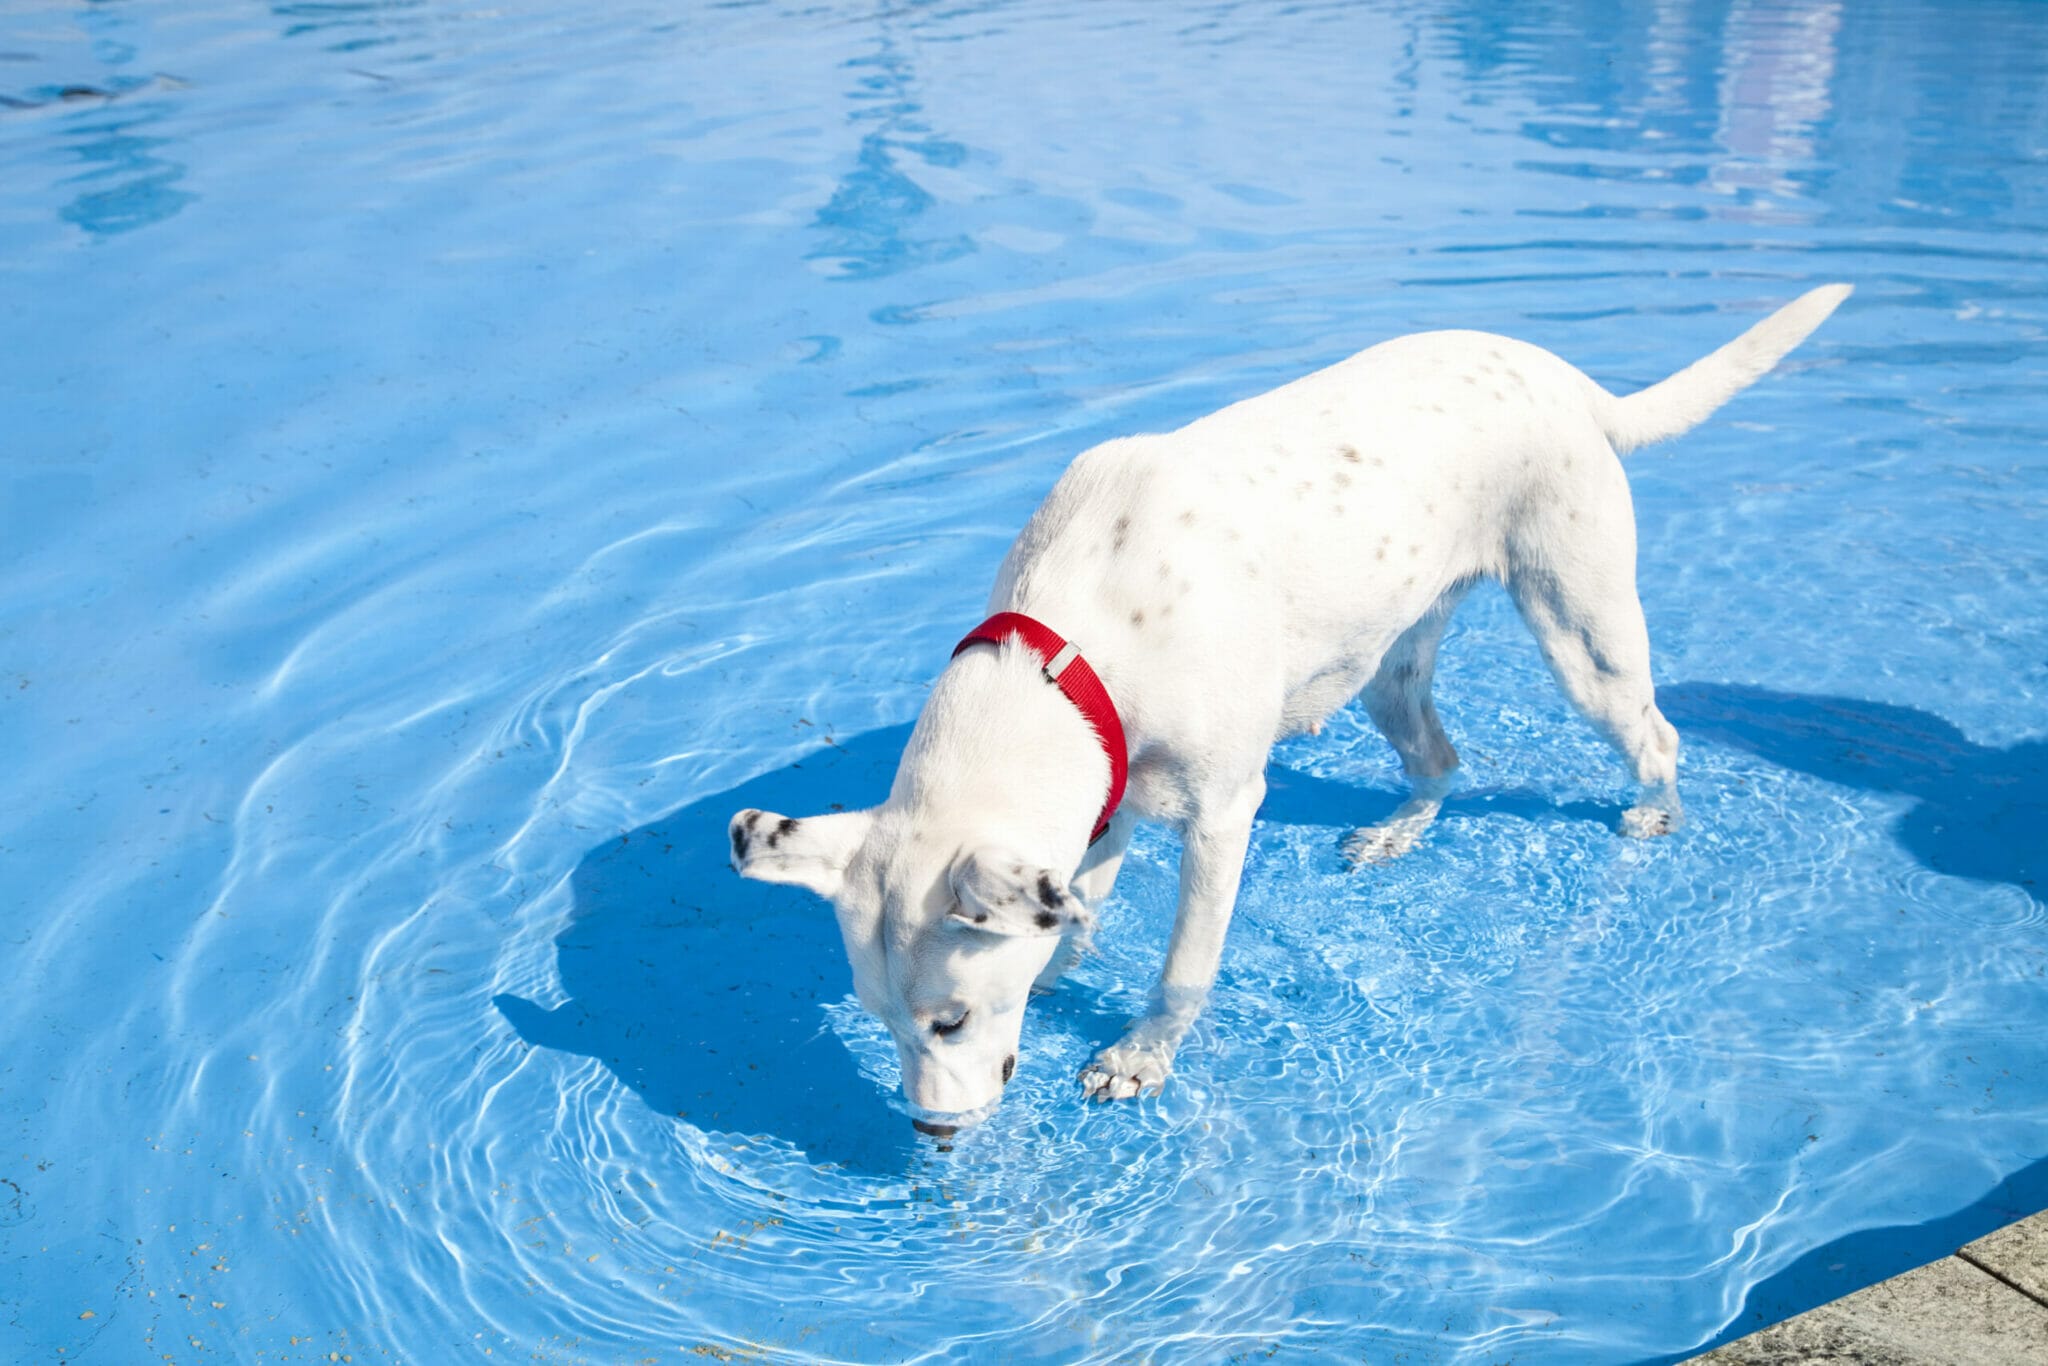 How to stop dog from drinking pool water?